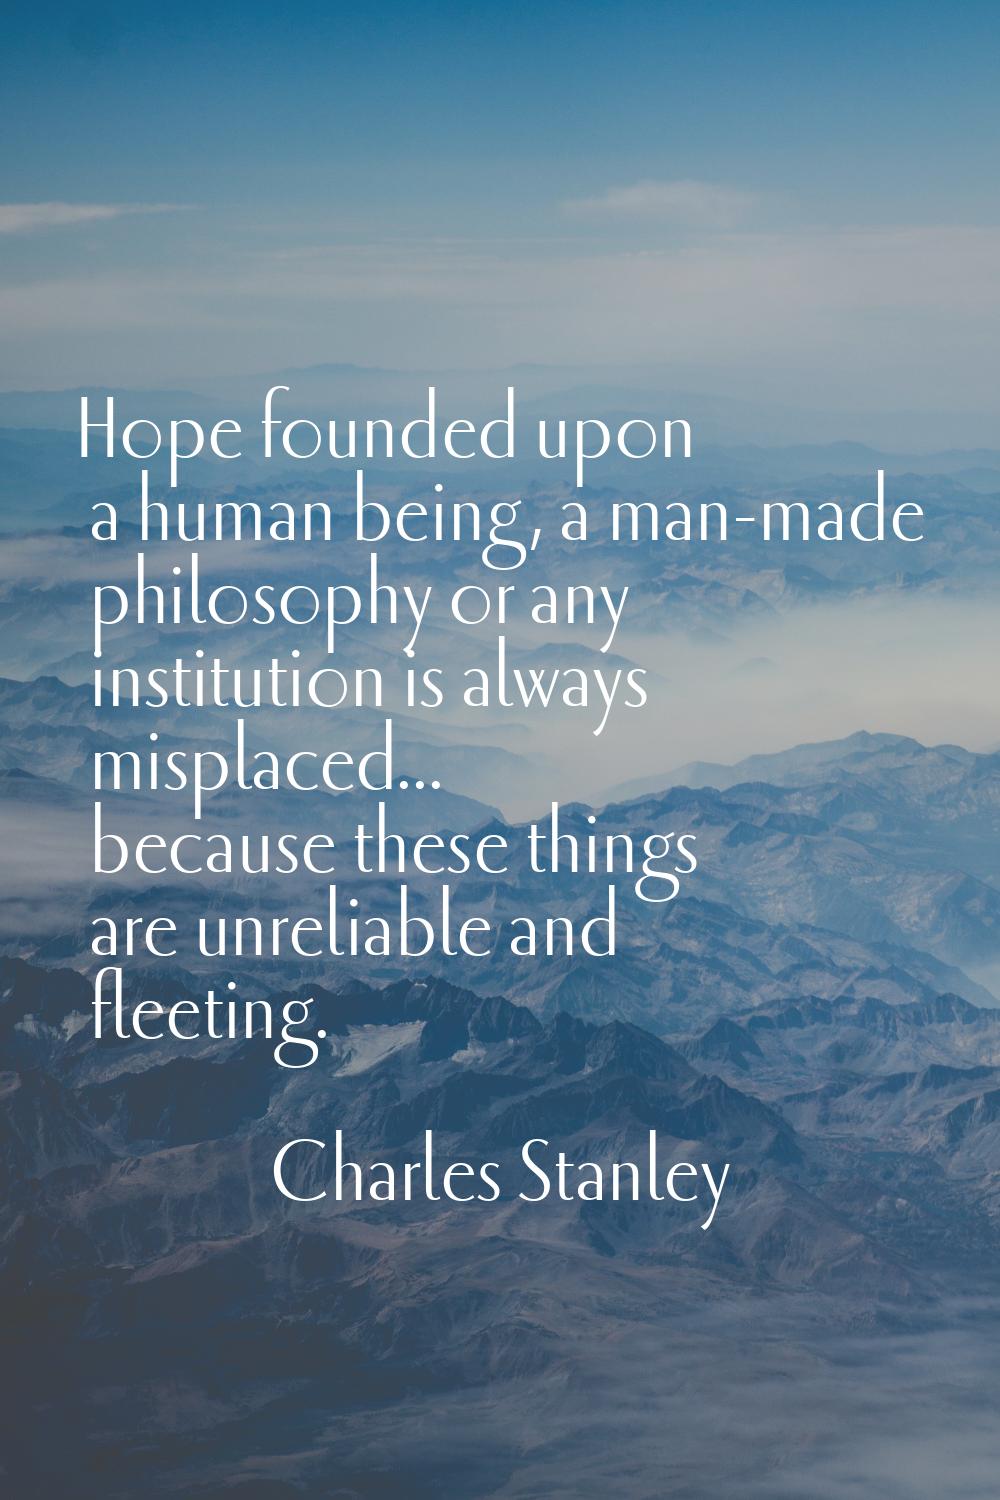 Hope founded upon a human being, a man-made philosophy or any institution is always misplaced... be